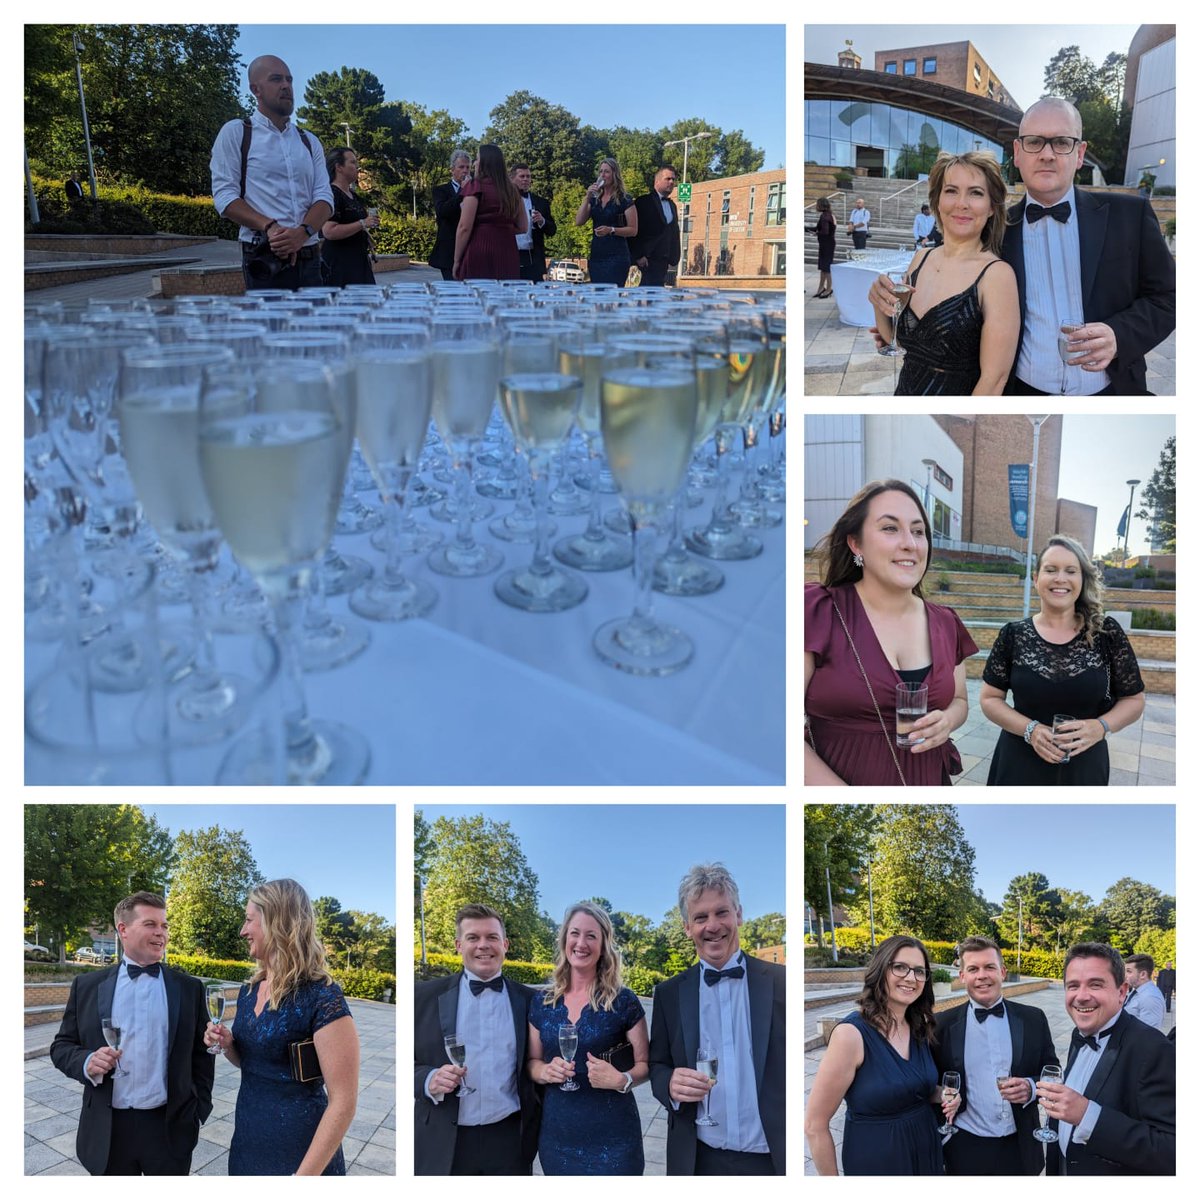 Unfortunately we came home empty handed from the Devon & Somerset Law Society Awards last night but for Steph Rodgers , Gemma Williams & our firm to have been shortlisted was a great achievement. We are so proud of our firm and the excellent people who make us what we are #dasls